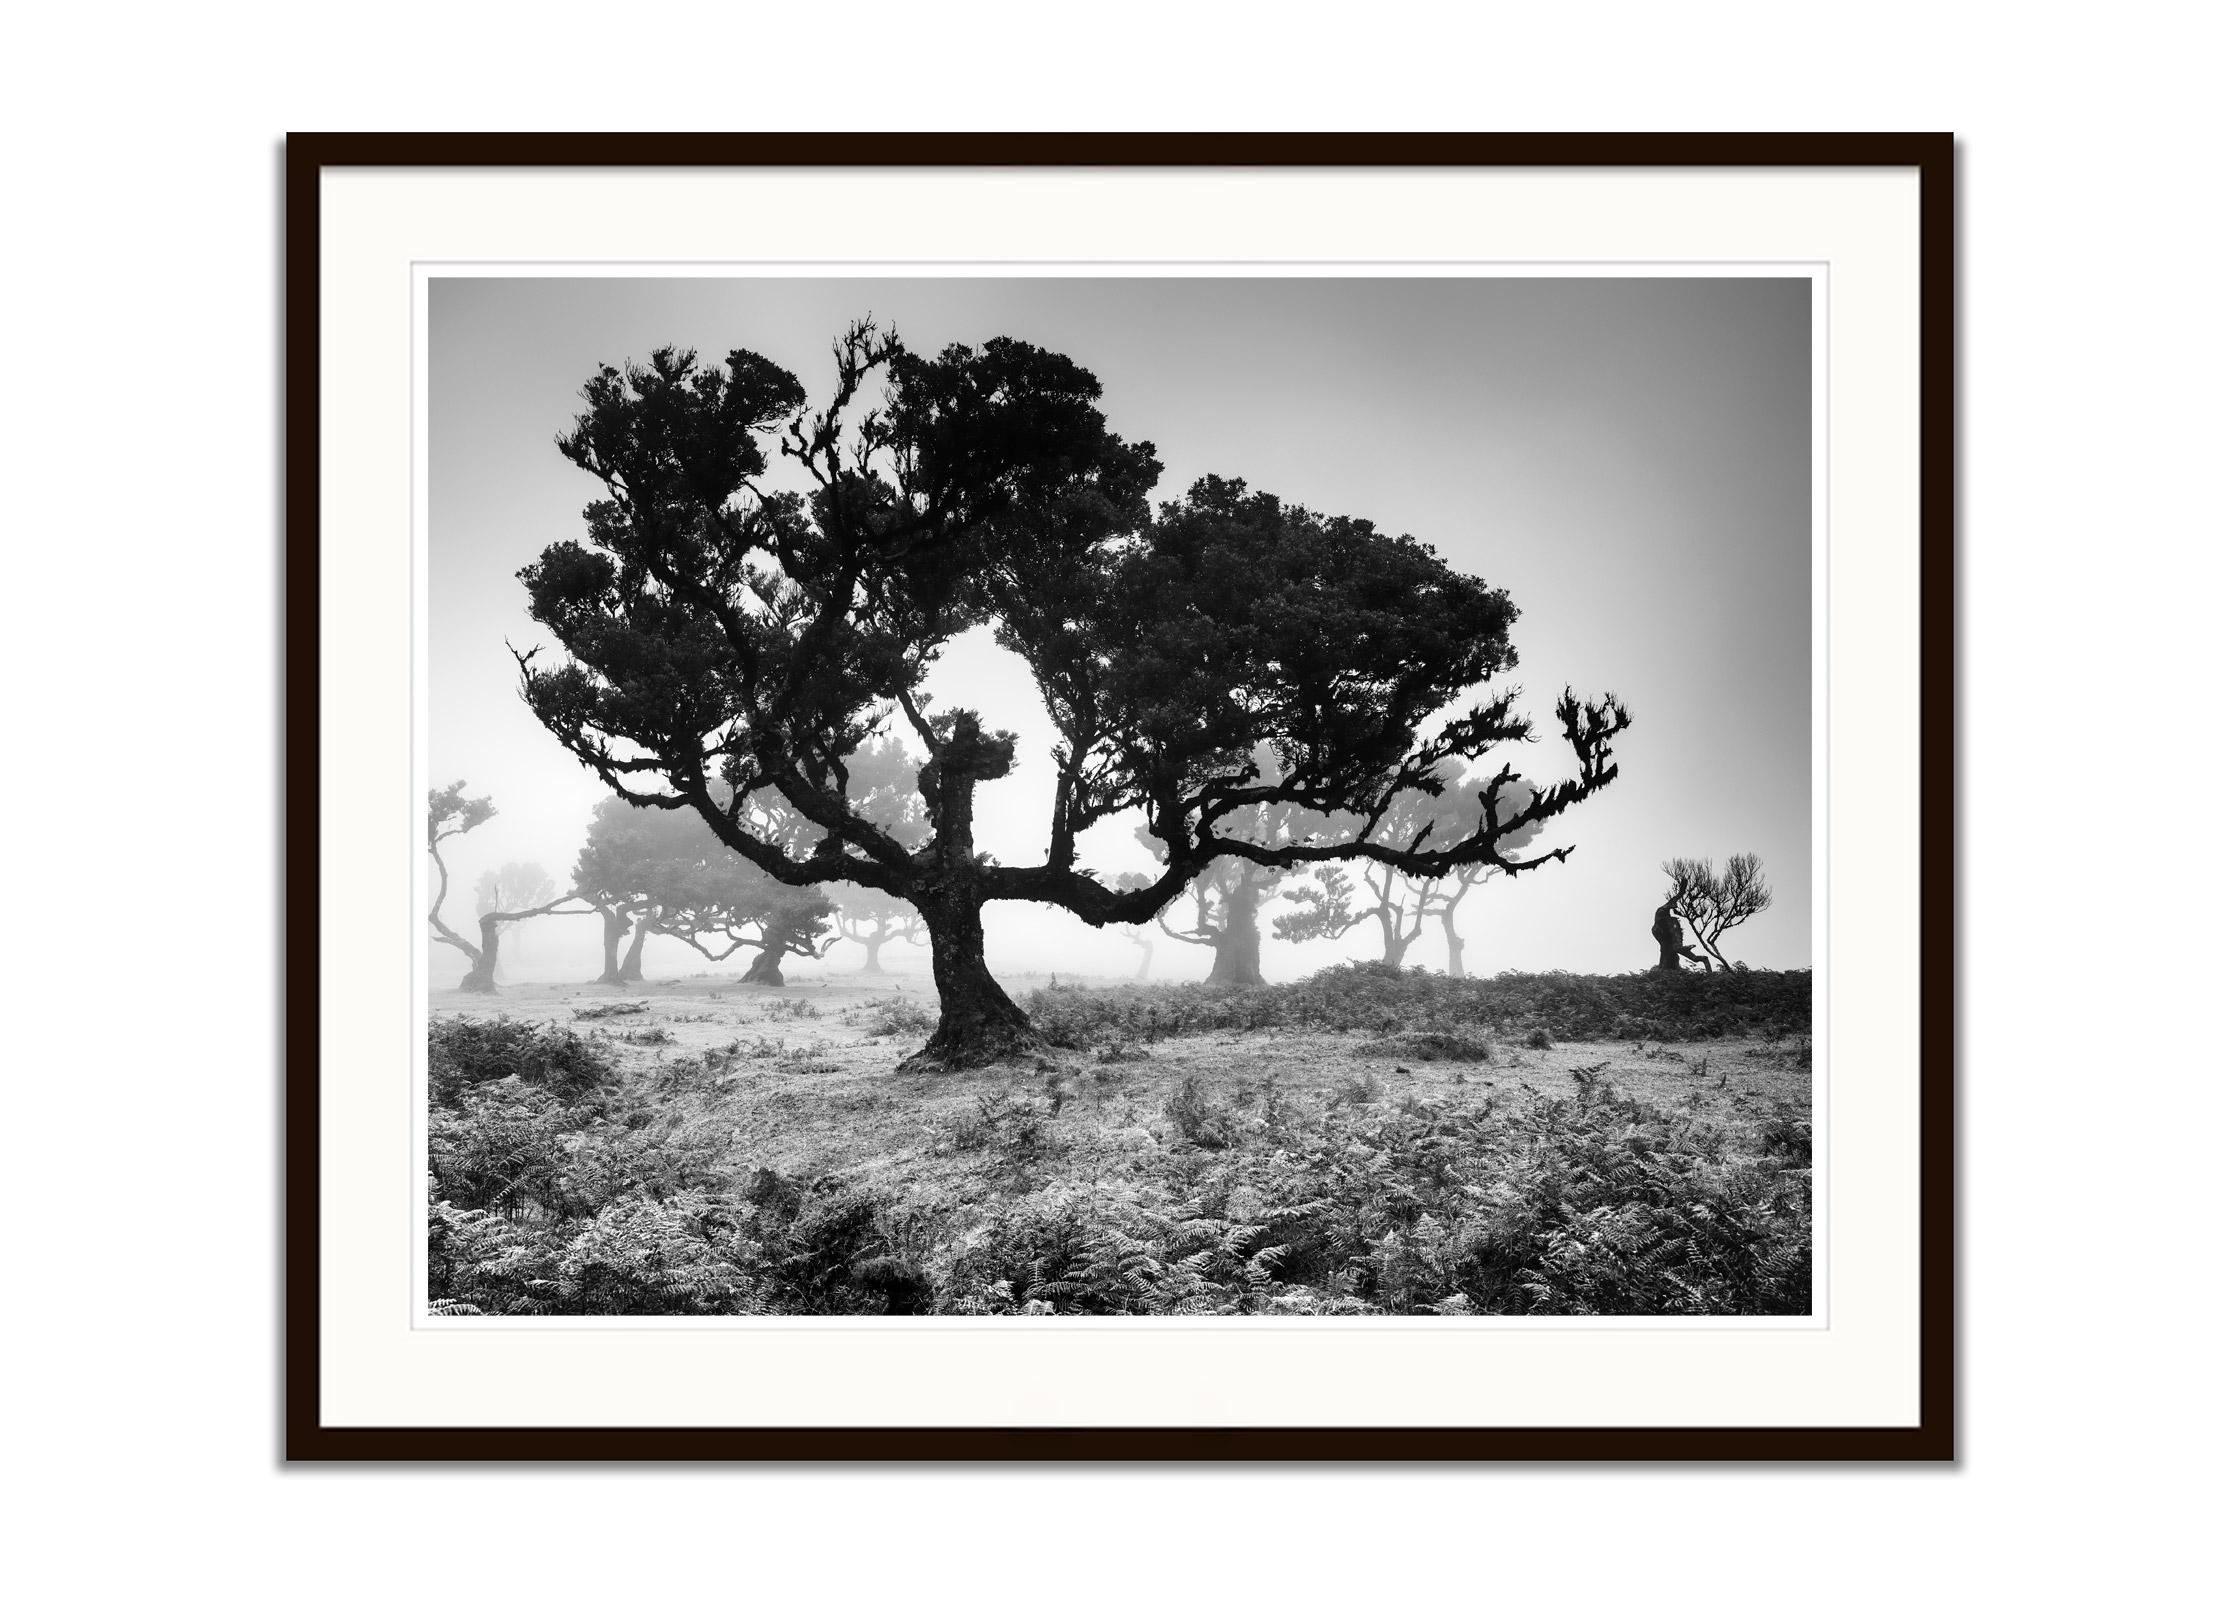 Ancient Laurisilva Forest, Tree, Portugal, black and white landscape photography - Gray Black and White Photograph by Gerald Berghammer